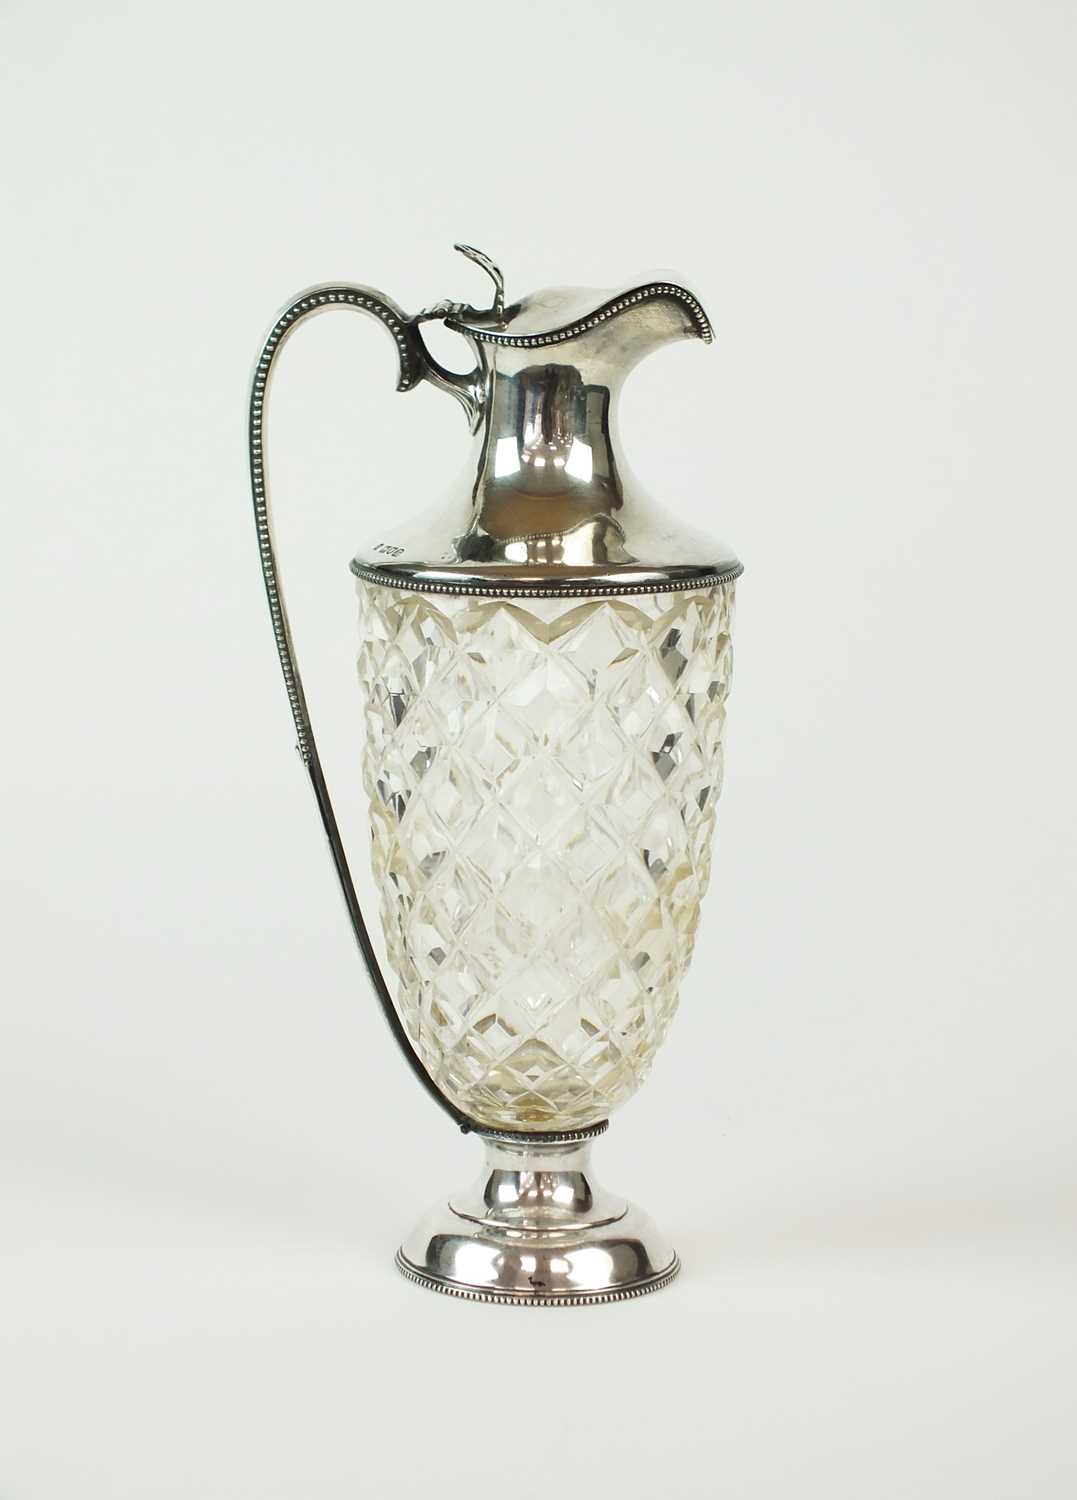 Lot 116 - An early 20th century silver mounted ewer